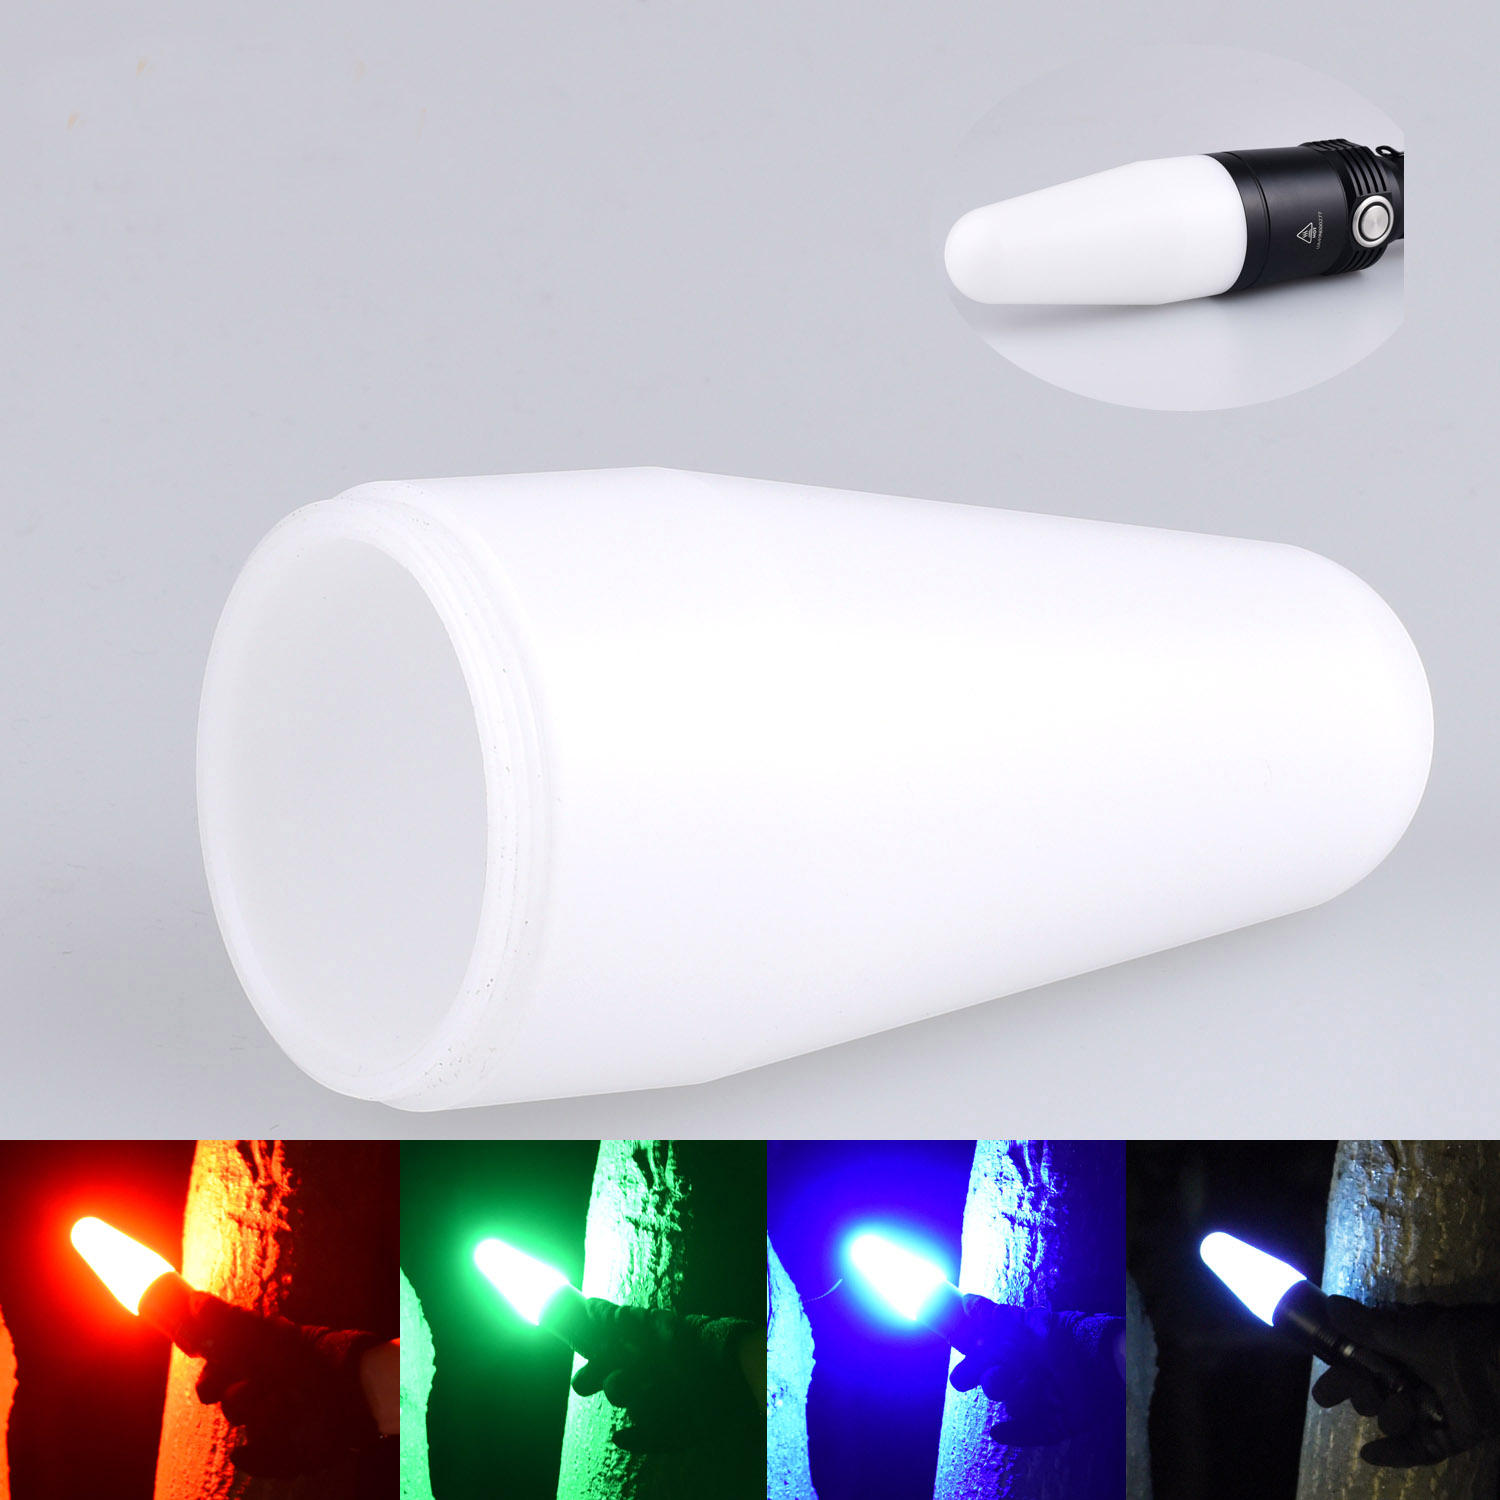 Fitorch Flashlight POM White Diffuser Signal Light Traffic Wand for Fitorch MR35